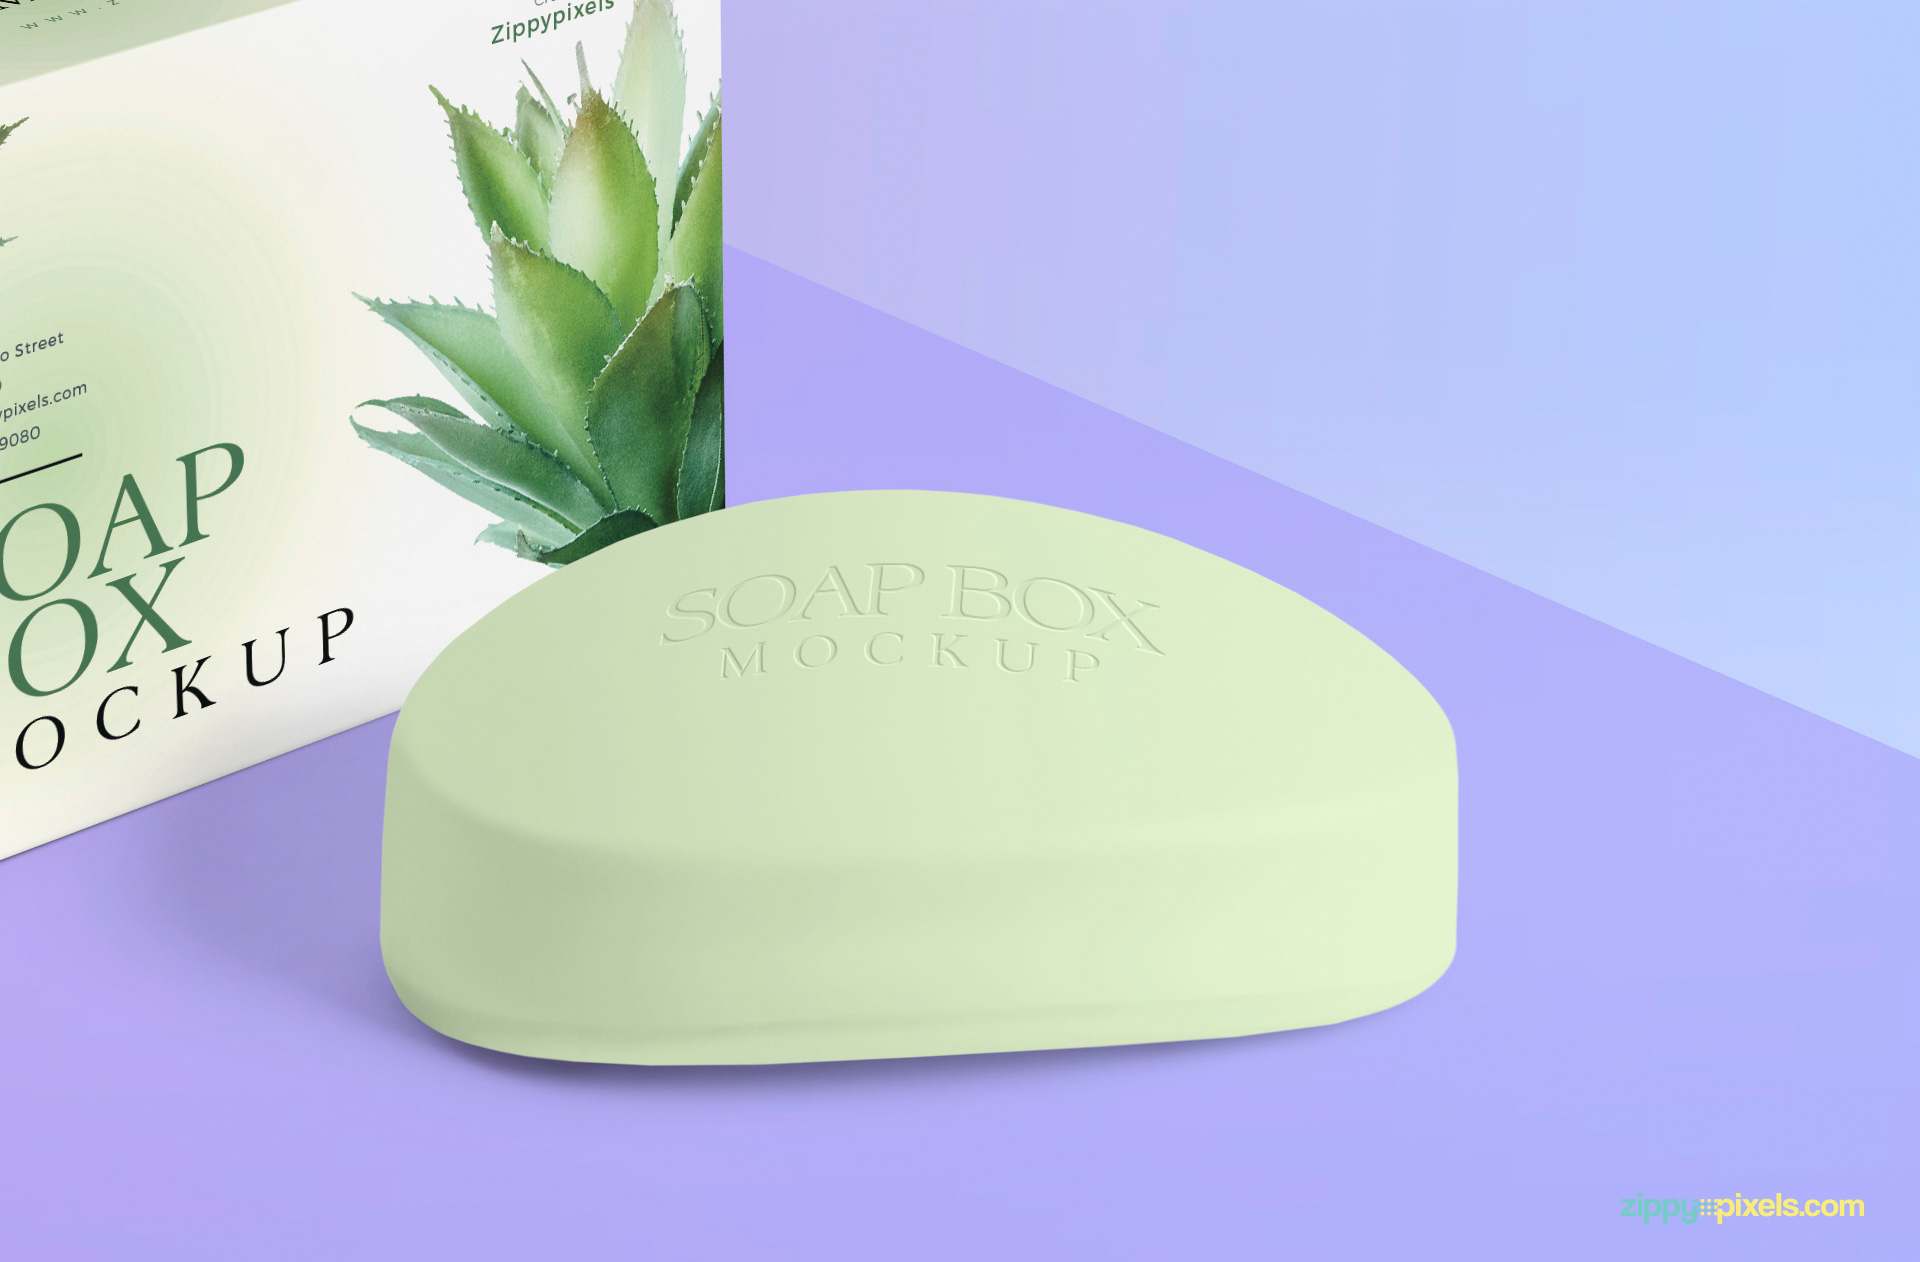 This soap mockup will let your designs be displayed with inner emboss effect.